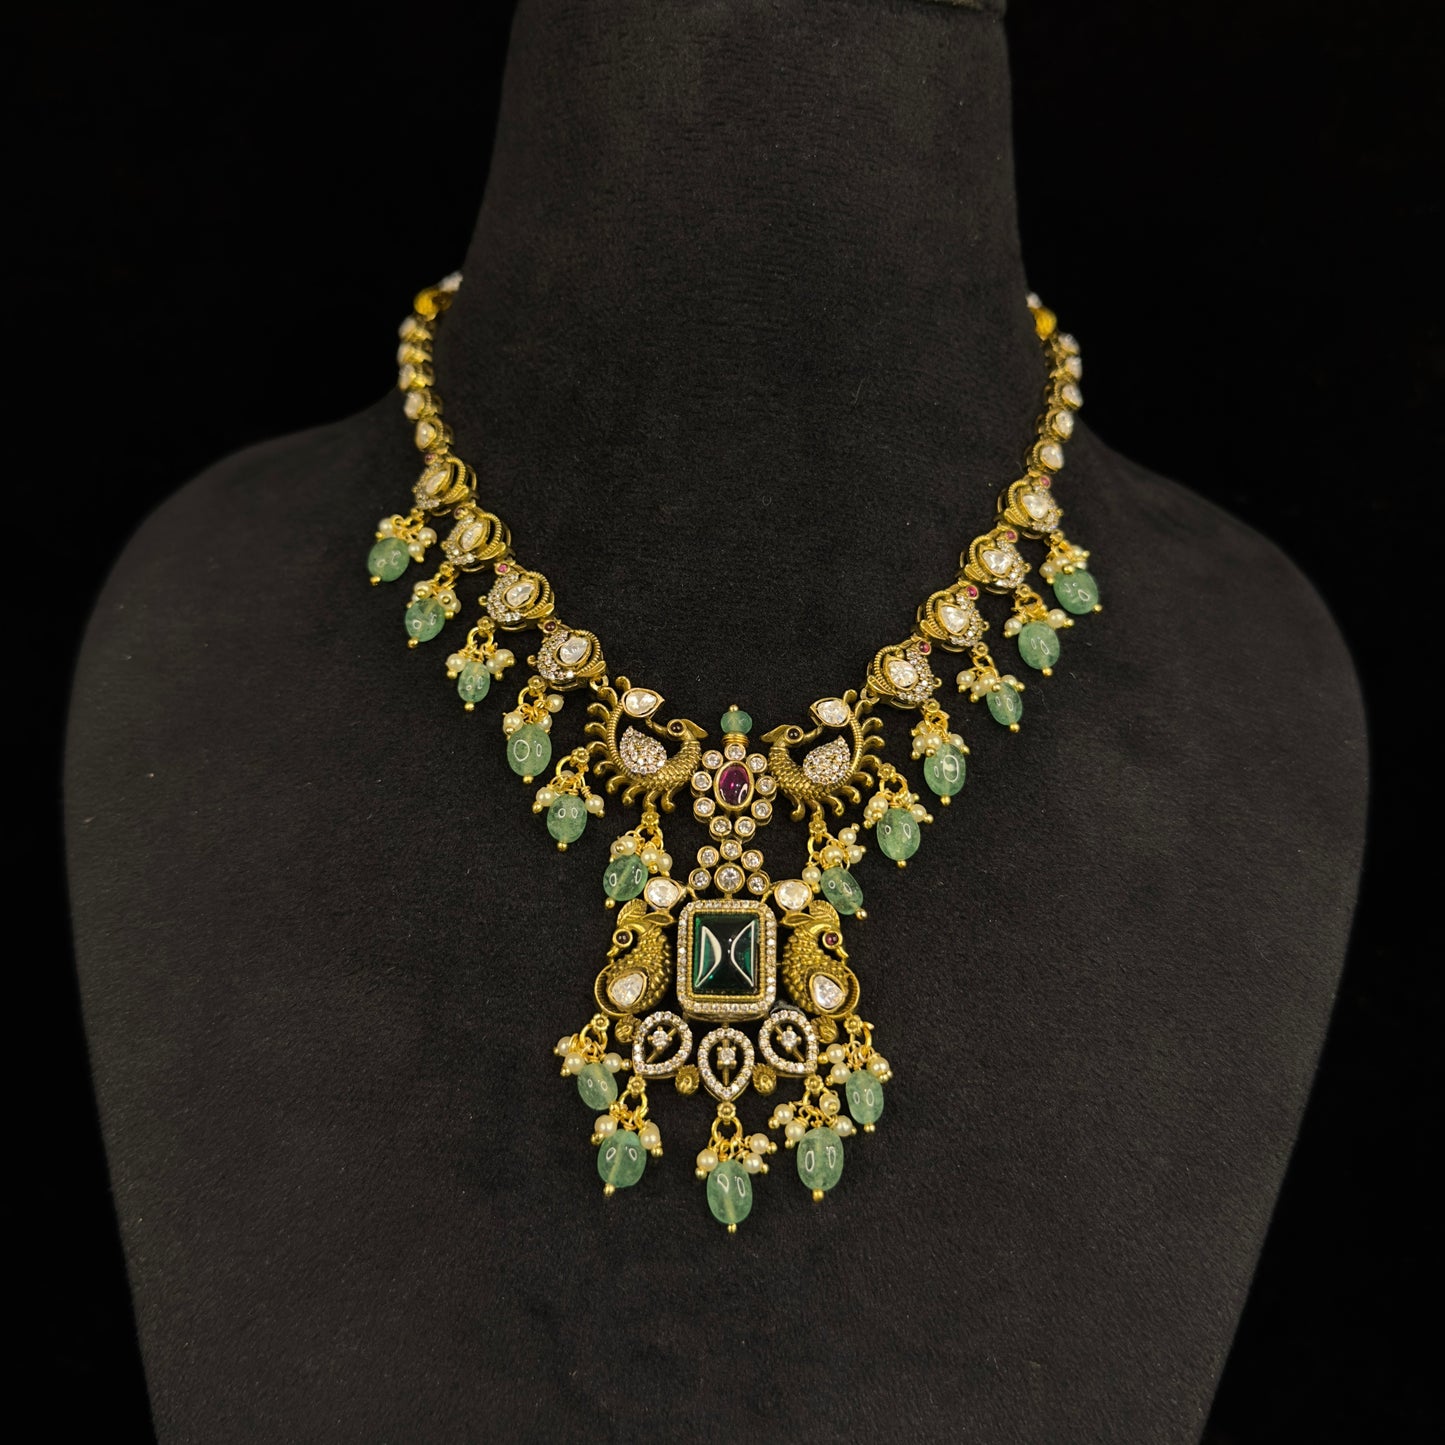 Antique Victorian finish Peacock Necklace with earrings